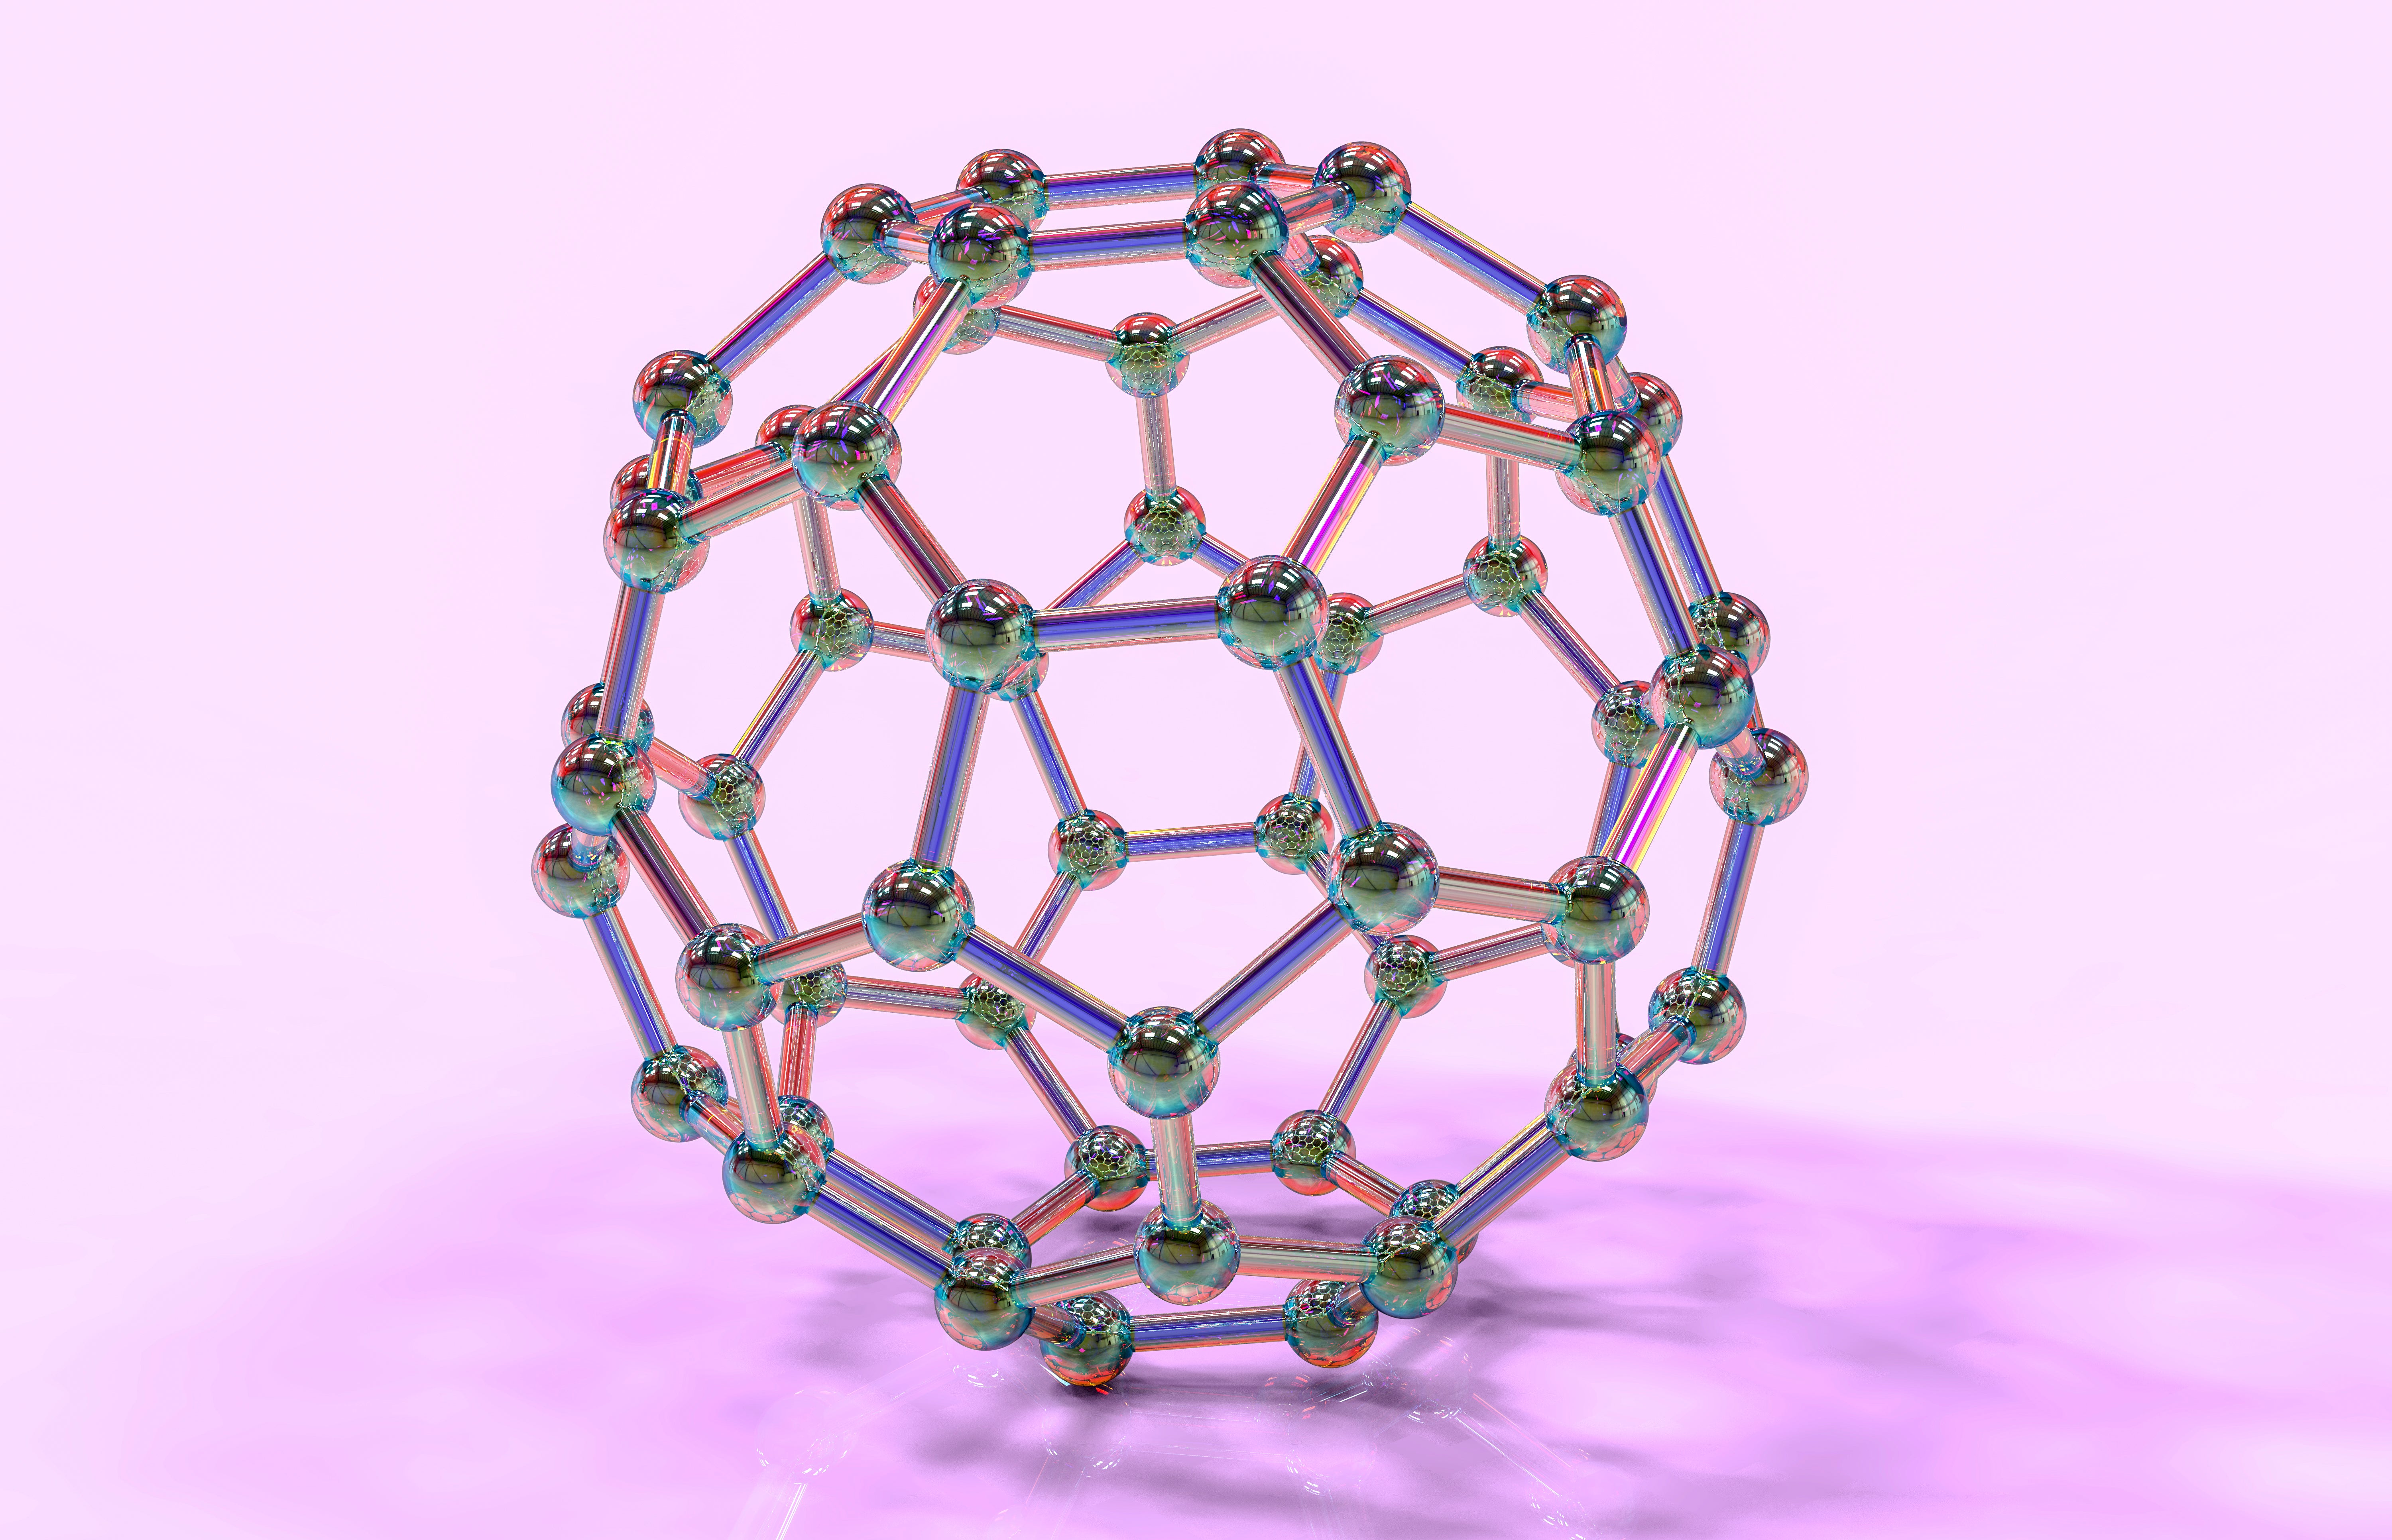 A model of a Fullerene molecule, or “Bucky Ball,” a complex, soccer-ball like assemblage of 60 carbon atoms